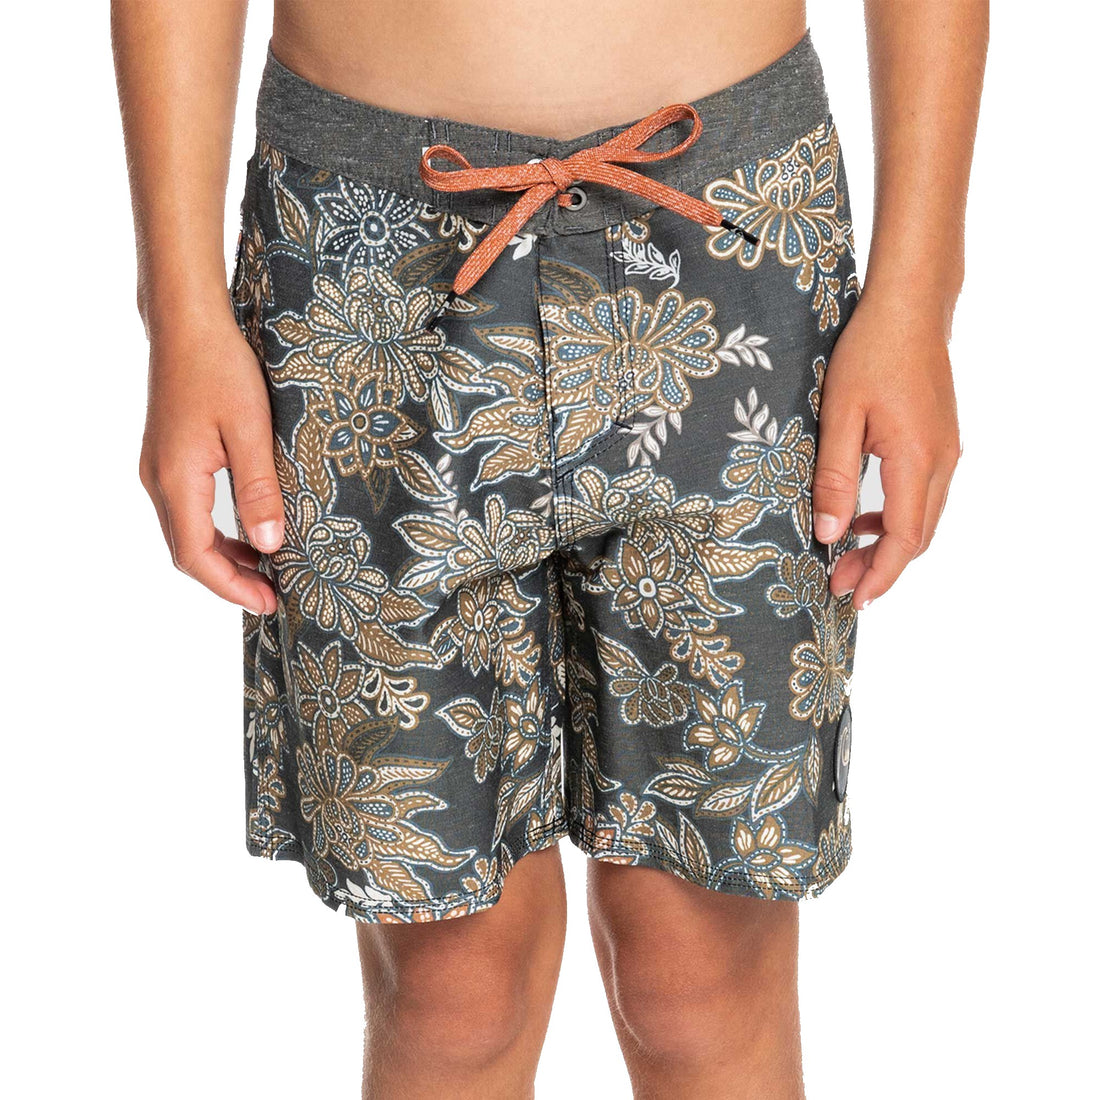 QUIKSILVER YOUTH HEMP STRETCH ENDLESS TRIP15" BOARSHORT